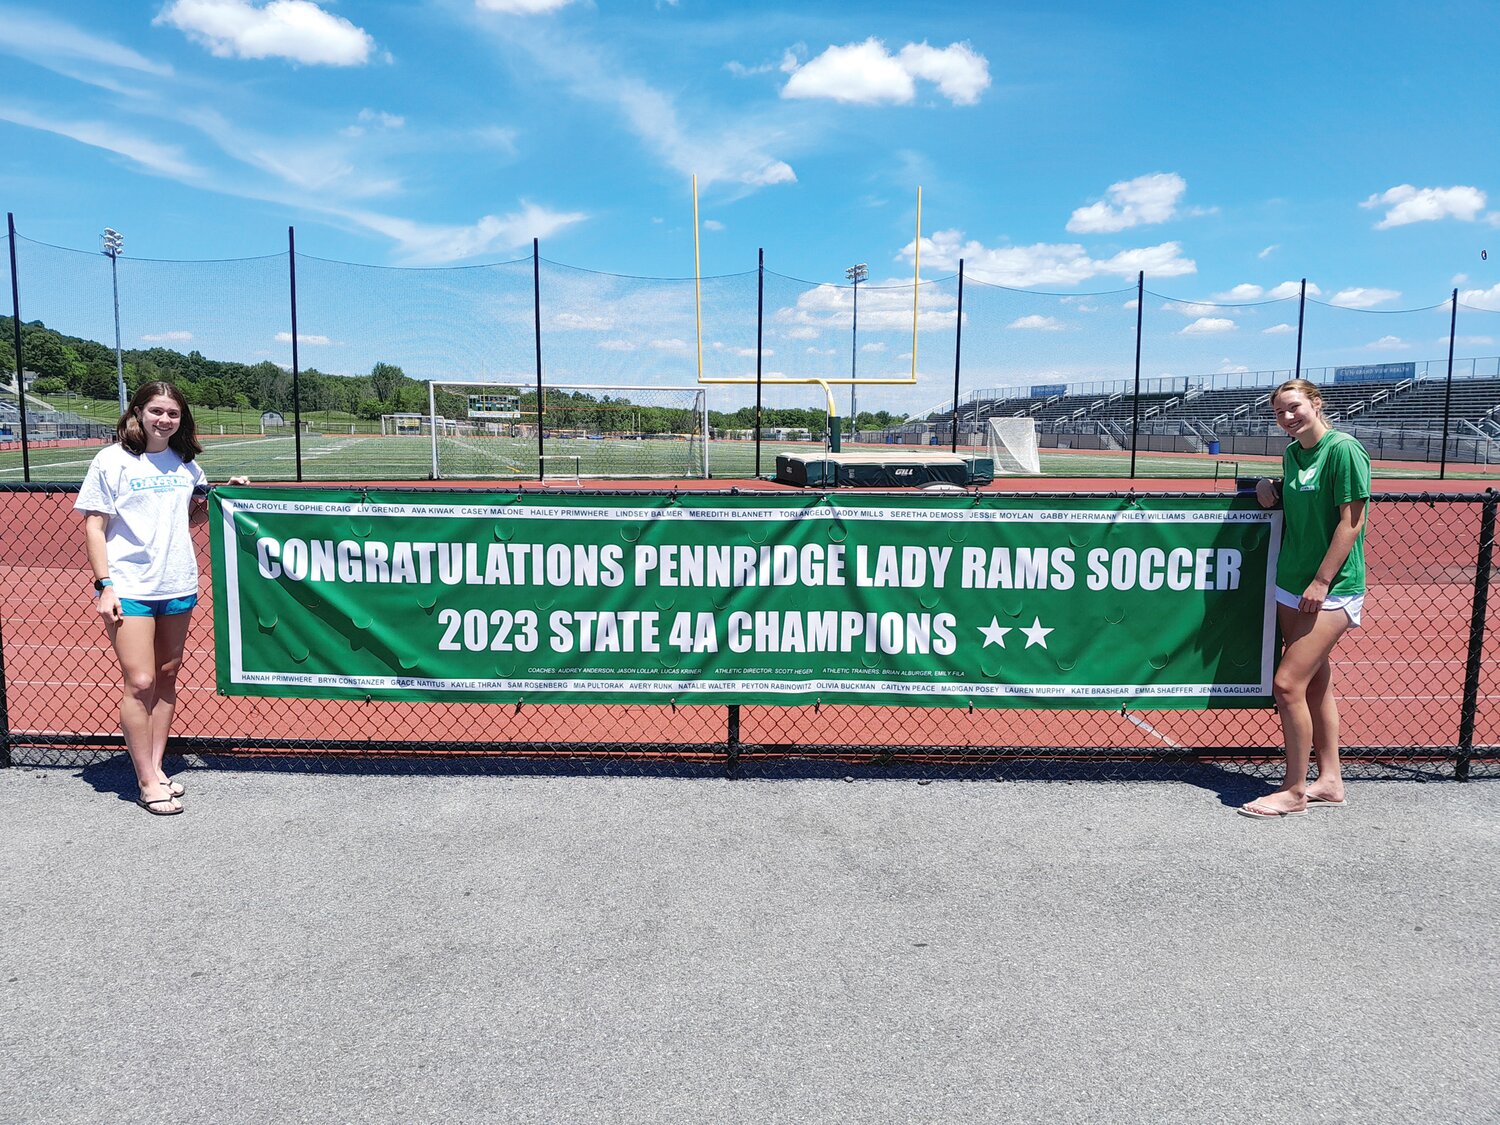 Pennridge girls soccer players Liv Grenda, left, and Anna Croyle book ended their high school careers with state titles in their freshman and senior years.